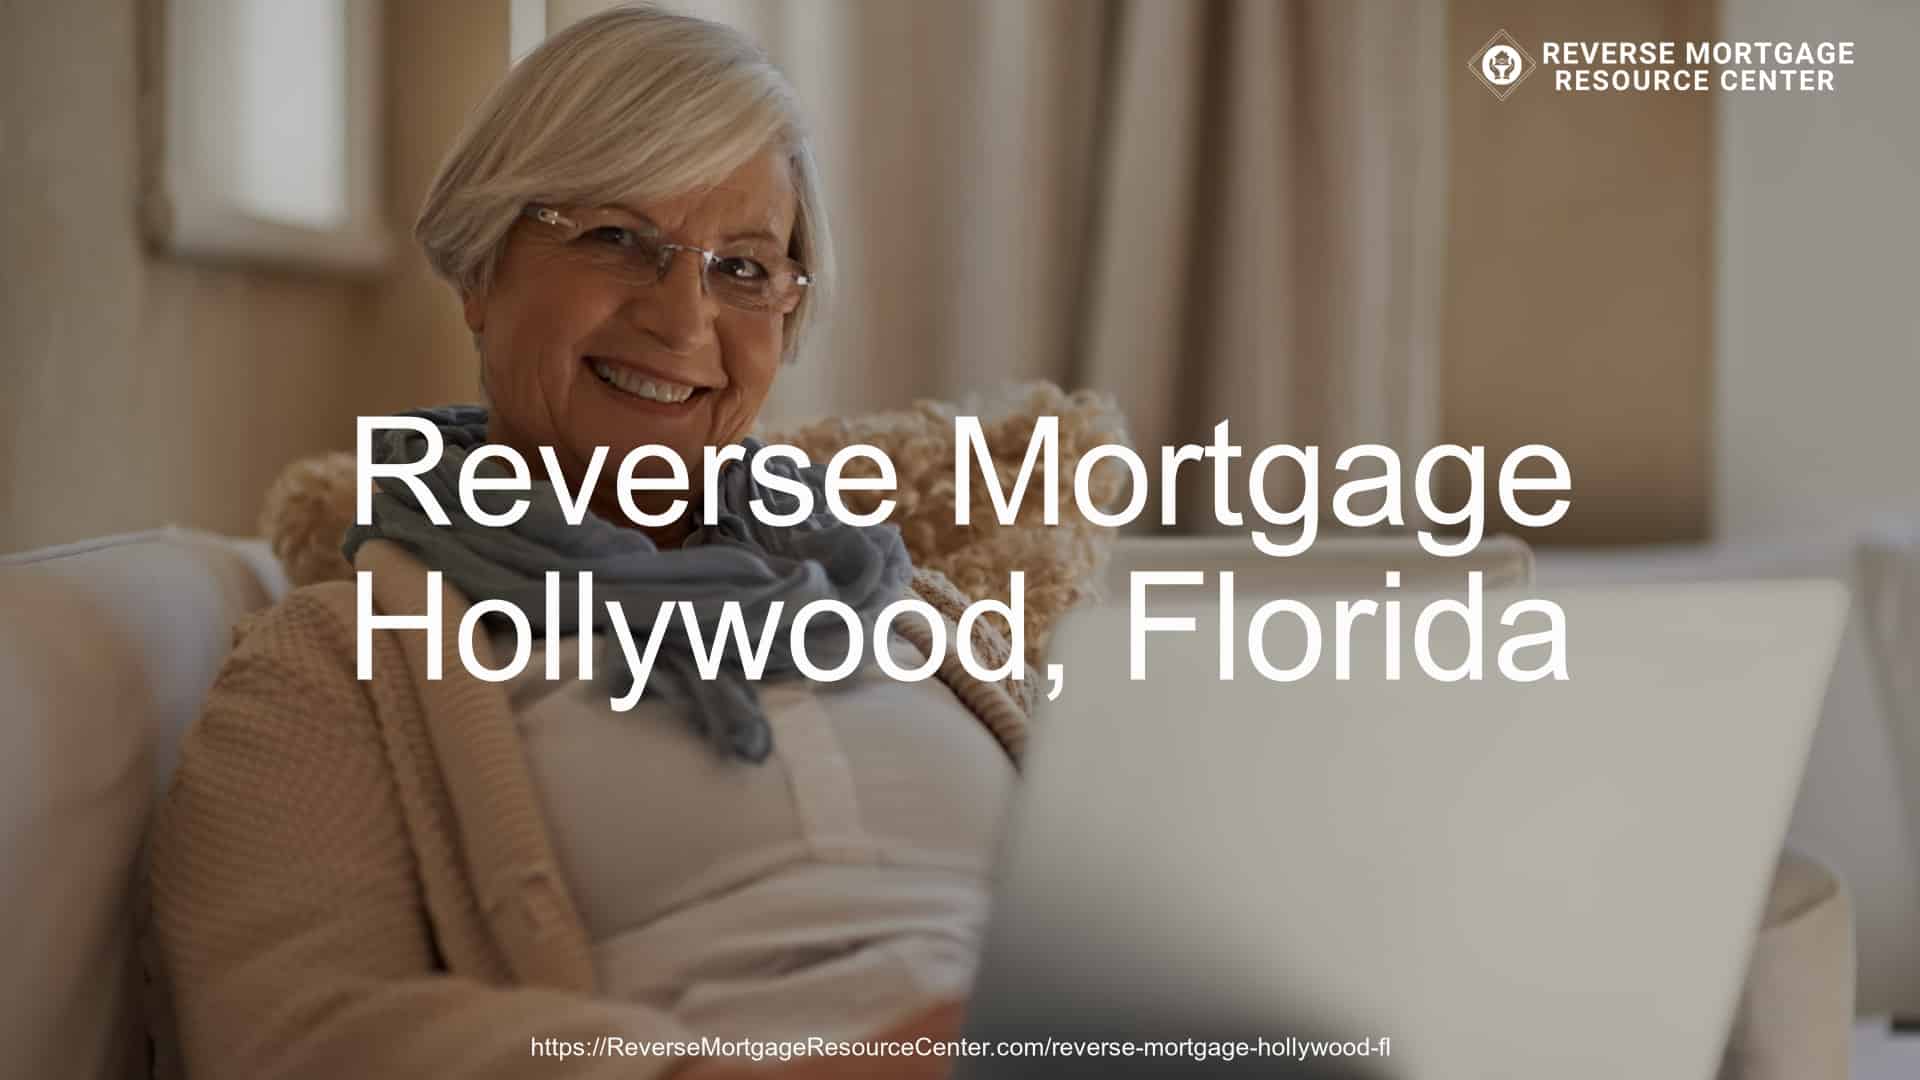 Reverse Mortgage in Hollywood, FL